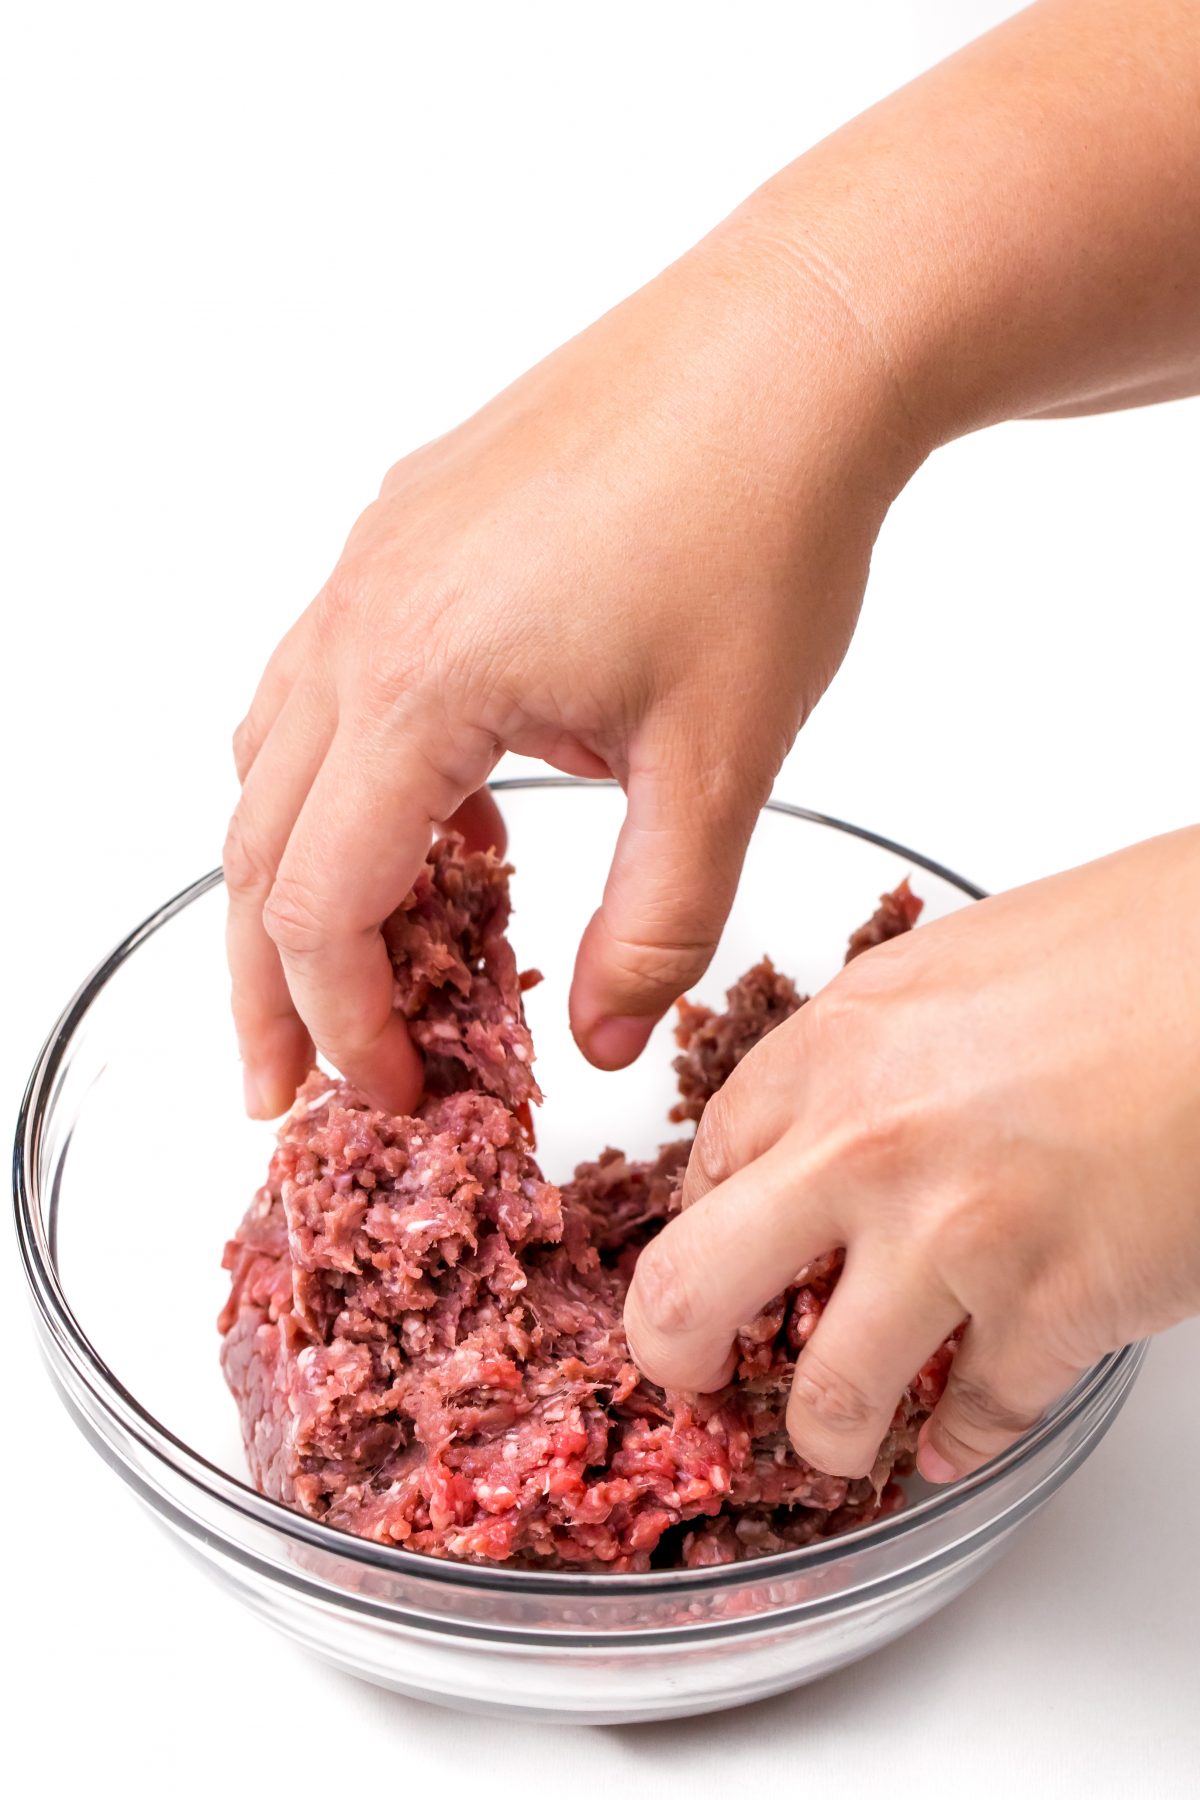 Oven baked burgers mixing raw beef in bowl by hand